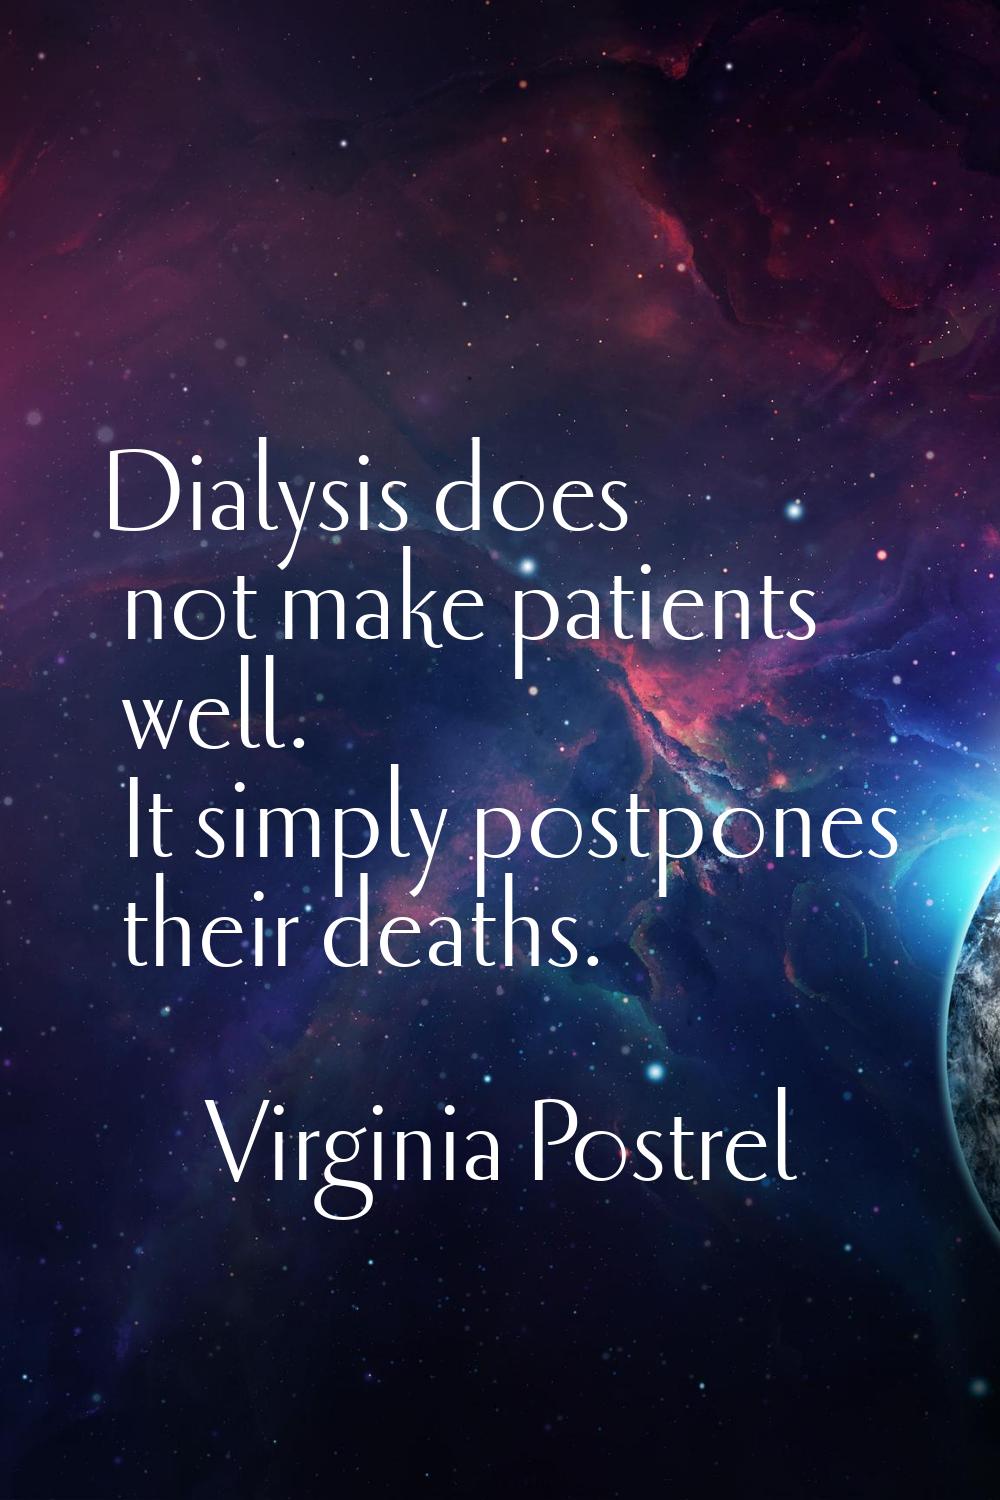 Dialysis does not make patients well. It simply postpones their deaths.